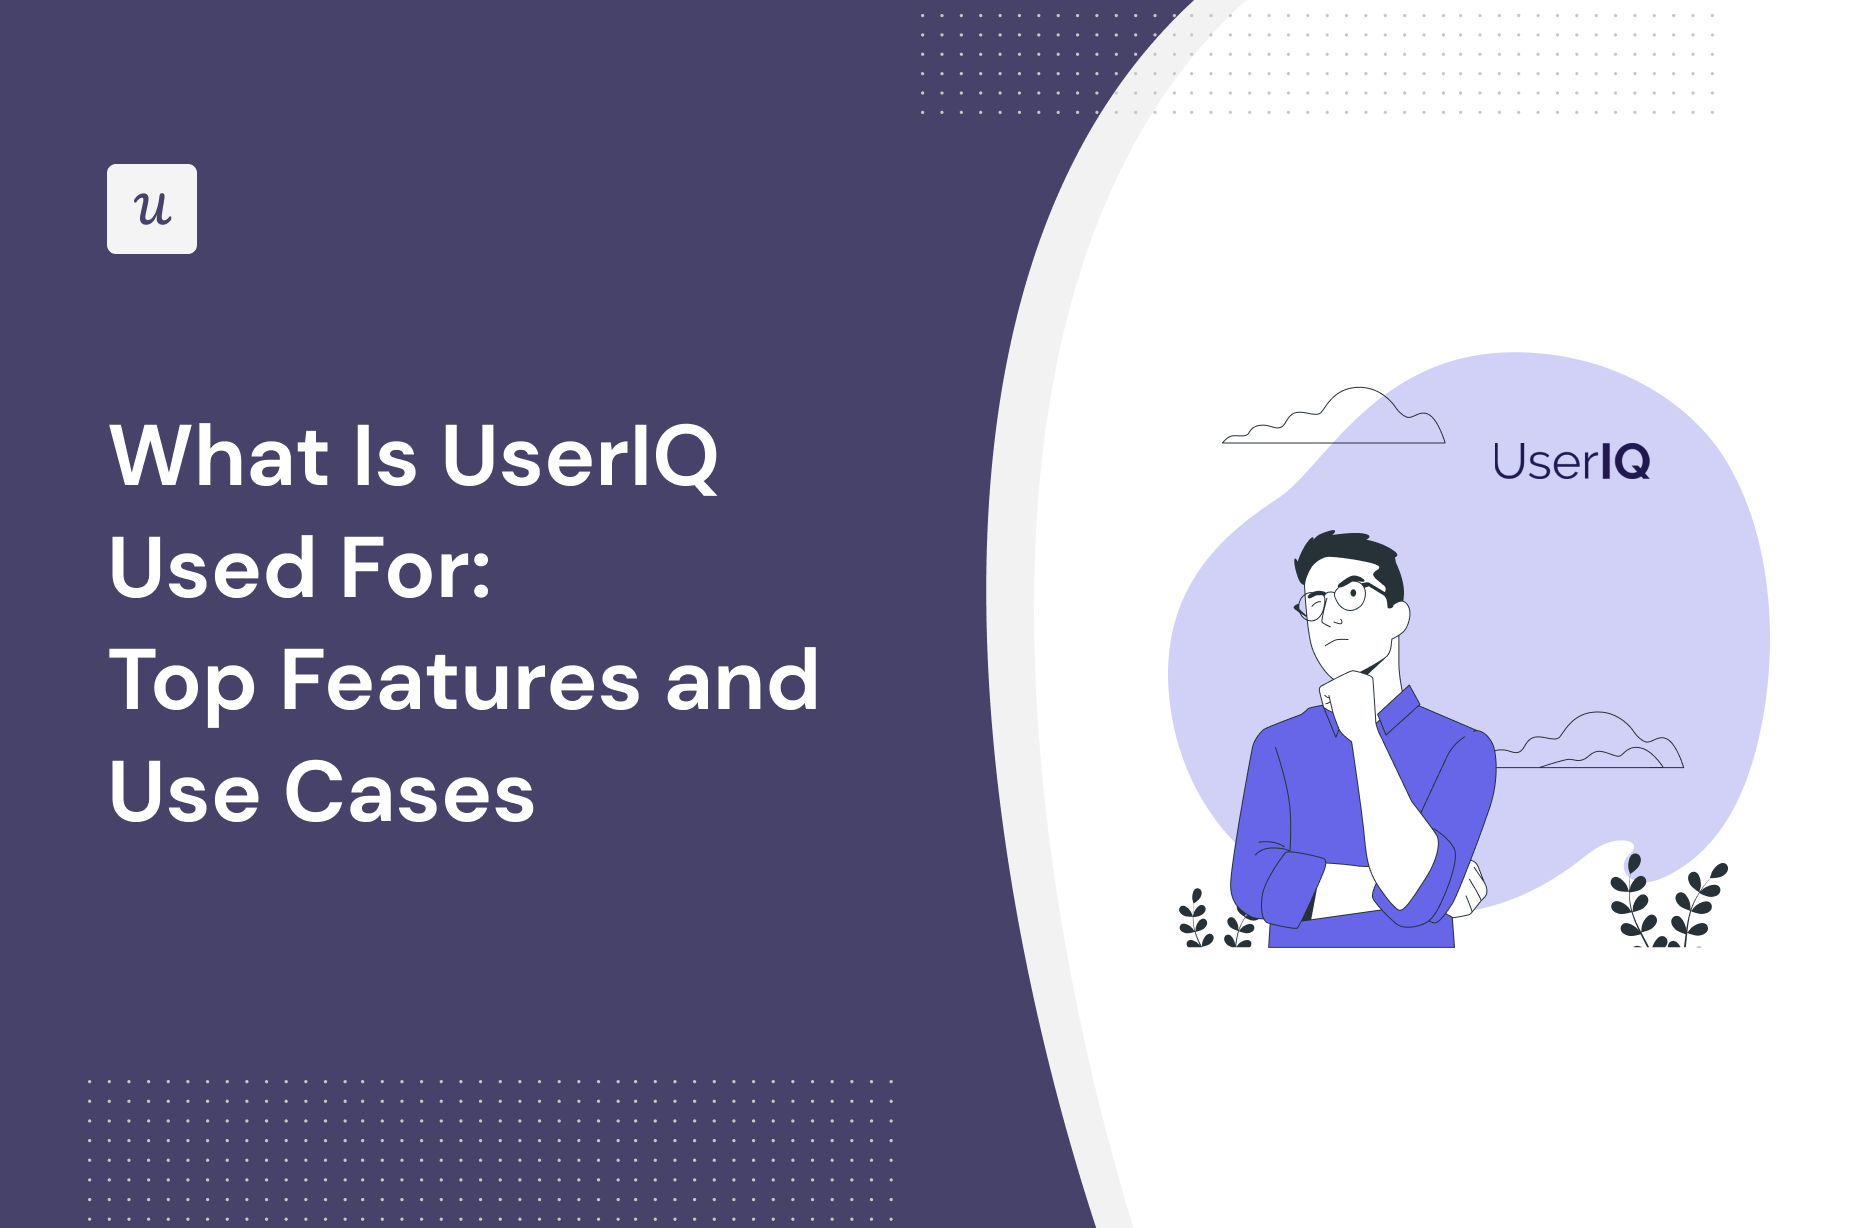 What Is UserIQ Used For: Top Features and Use Cases